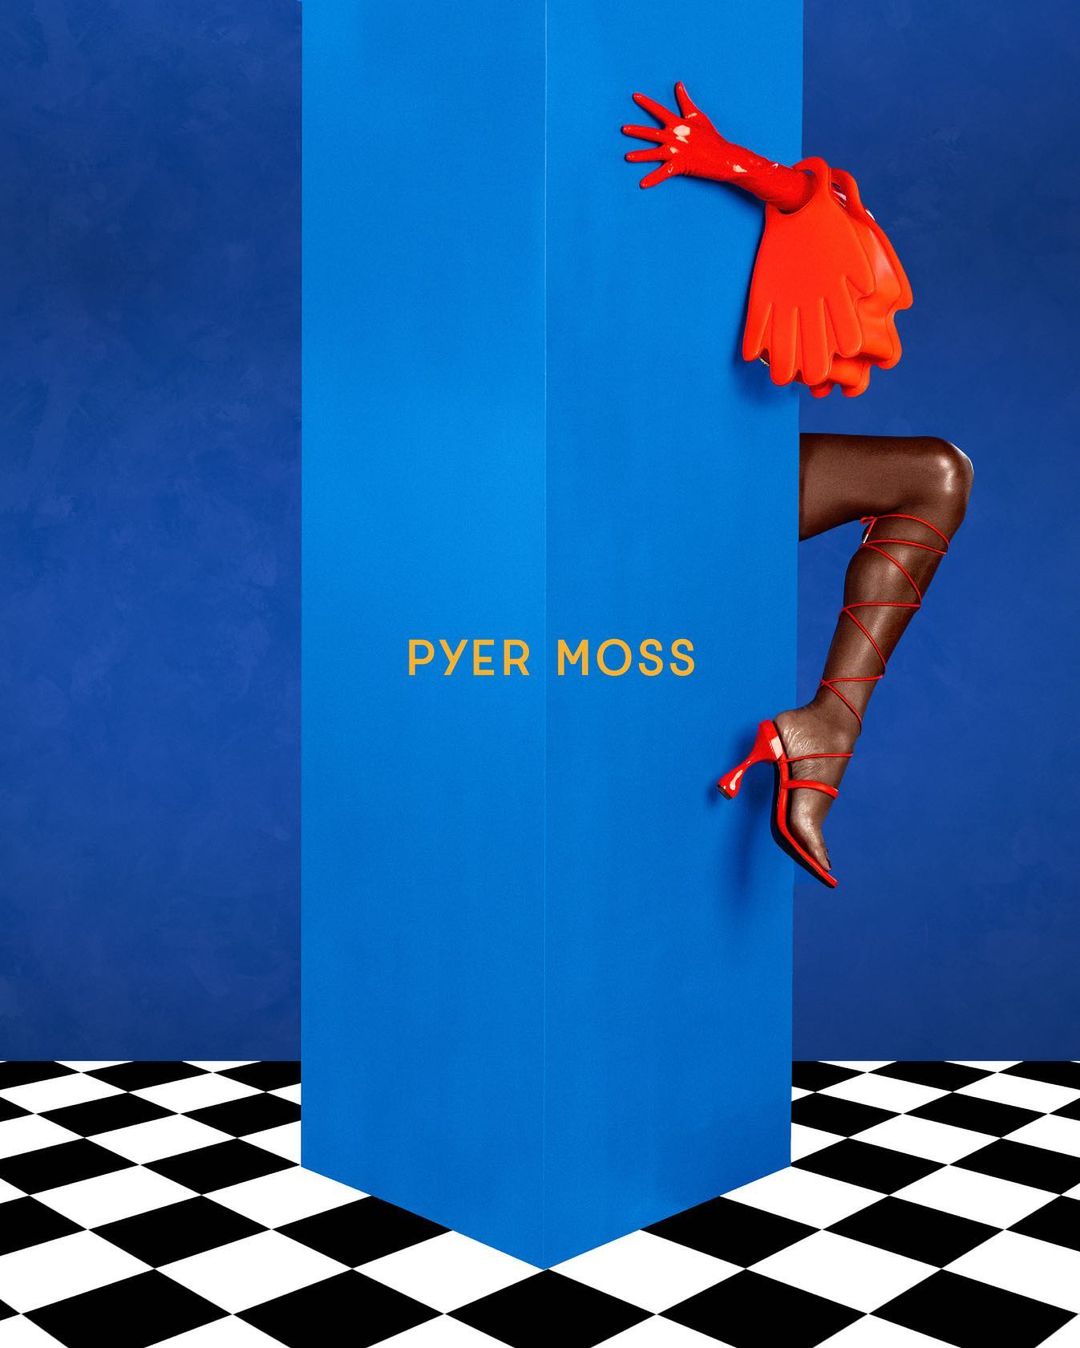 In Anticipation of Pyer Moss’ First Bag Collection